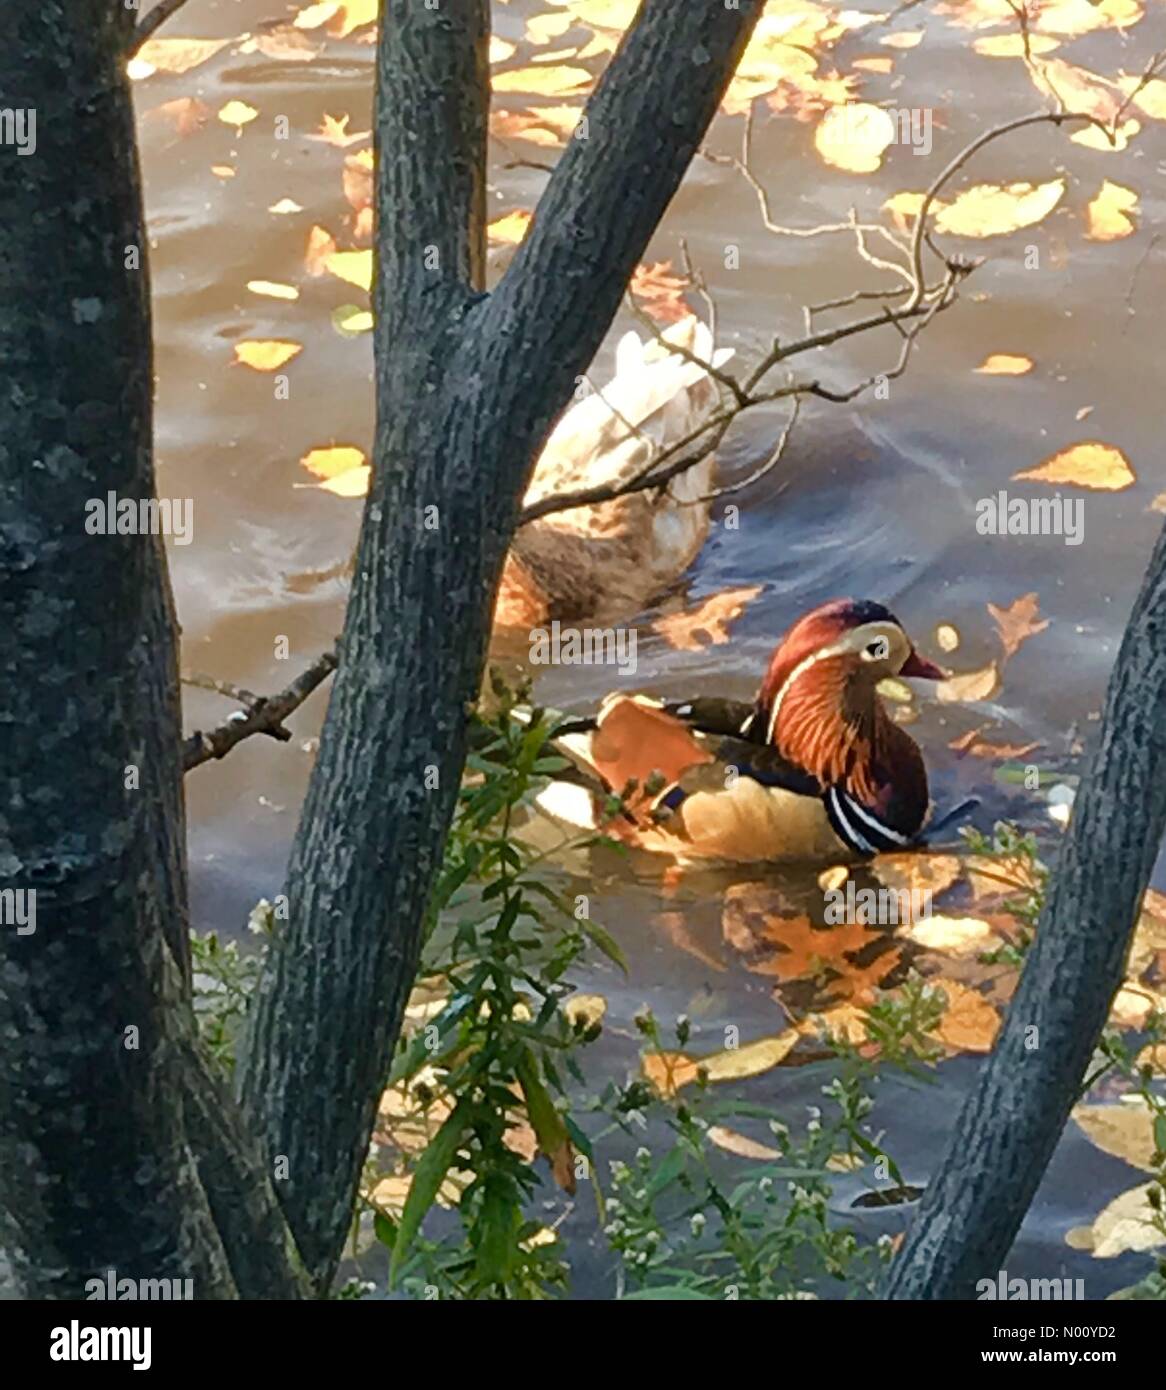 New York, New York, USA. 4th Nov, 2018. The Mandarin Duck of Central Park in New York. Worldwide celebrity as his origin is a mystery. Mobs of people and photographers trying to capture his image. Credit: Yvonne M. Conde/StockimoNews/Alamy Live News Stock Photo